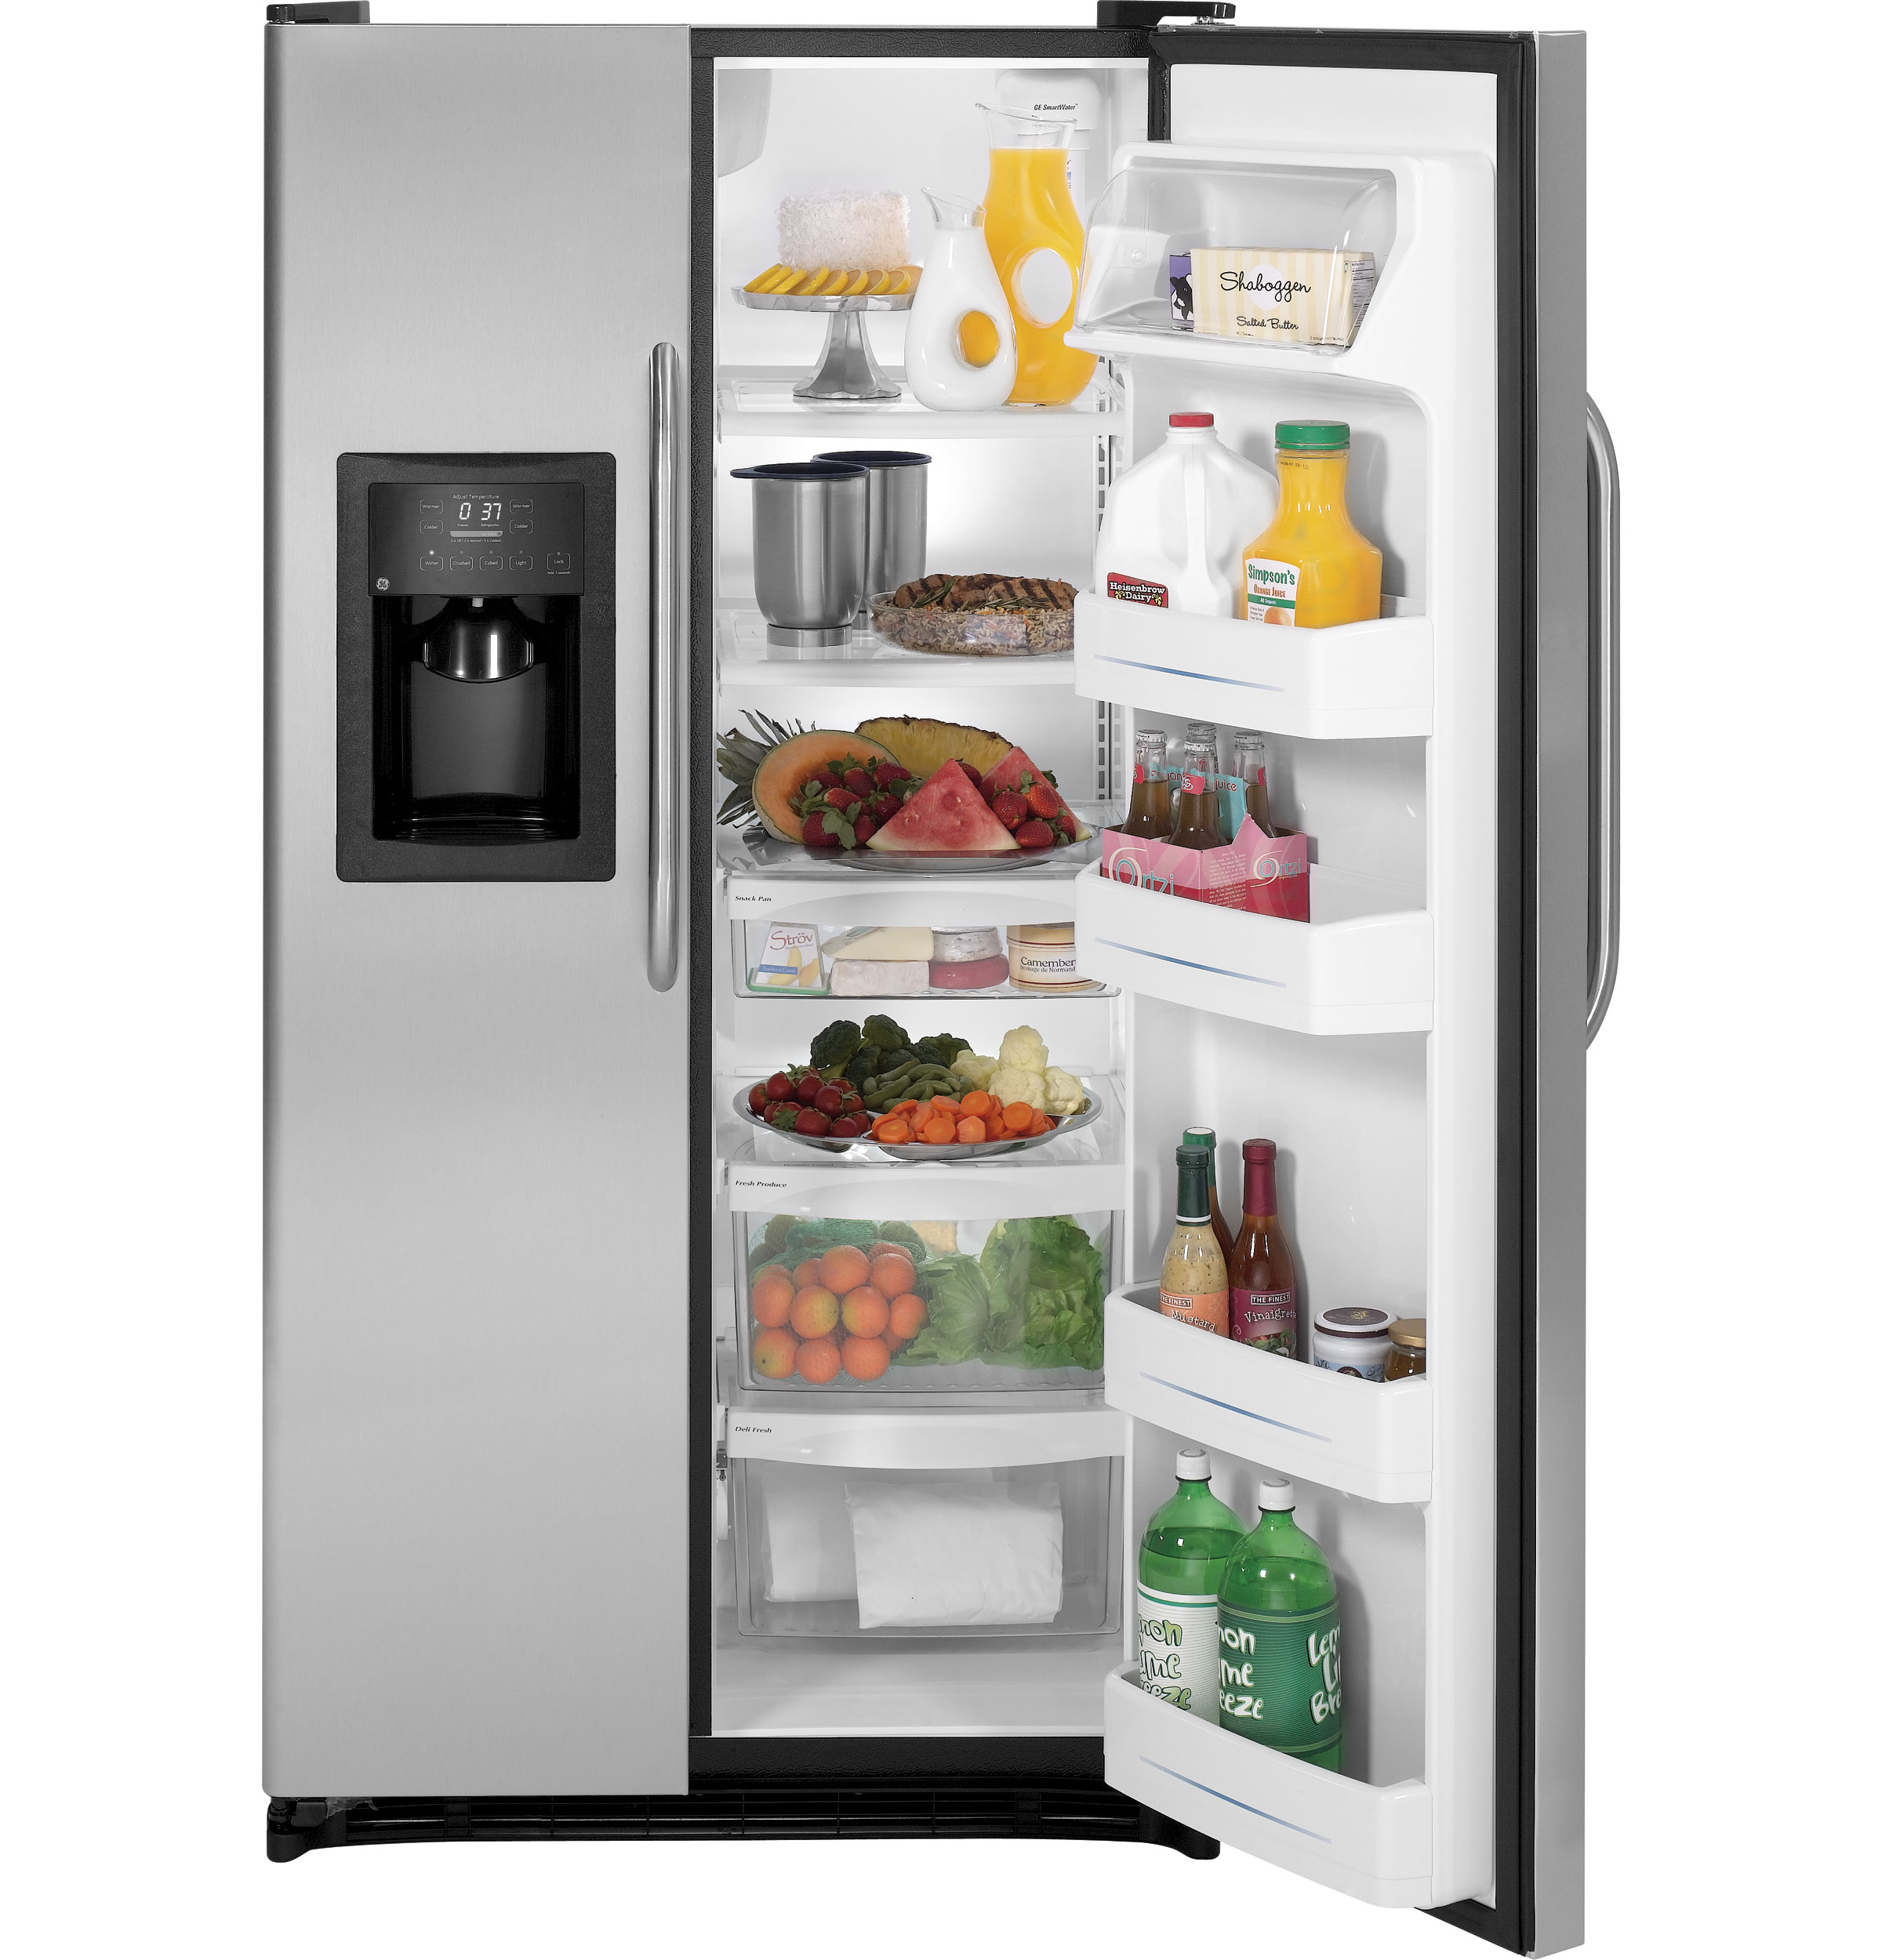 GE® ENERGY STAR® 21.9 Cu. Ft. Side-By-Side Refrigerator with Dispenser